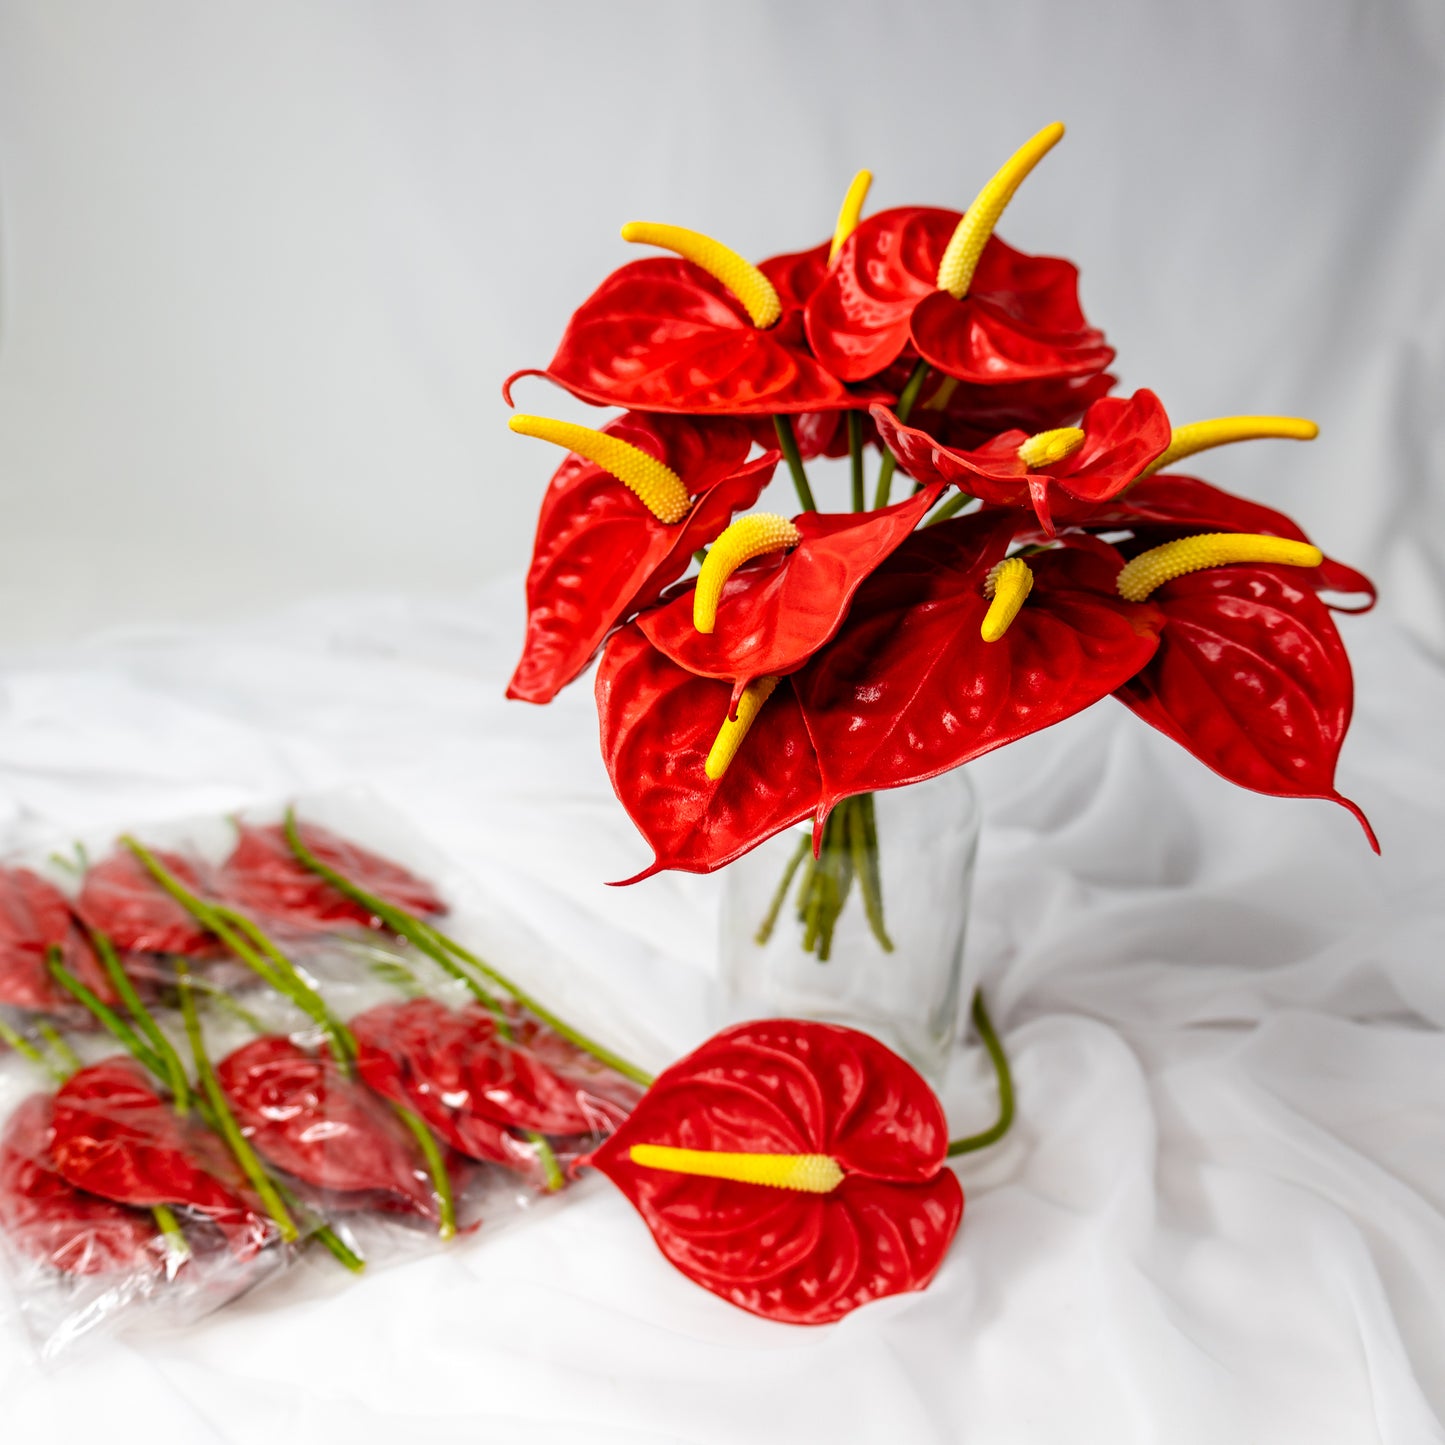 Anthurium Small Red  - Realistic Artificial Flowers